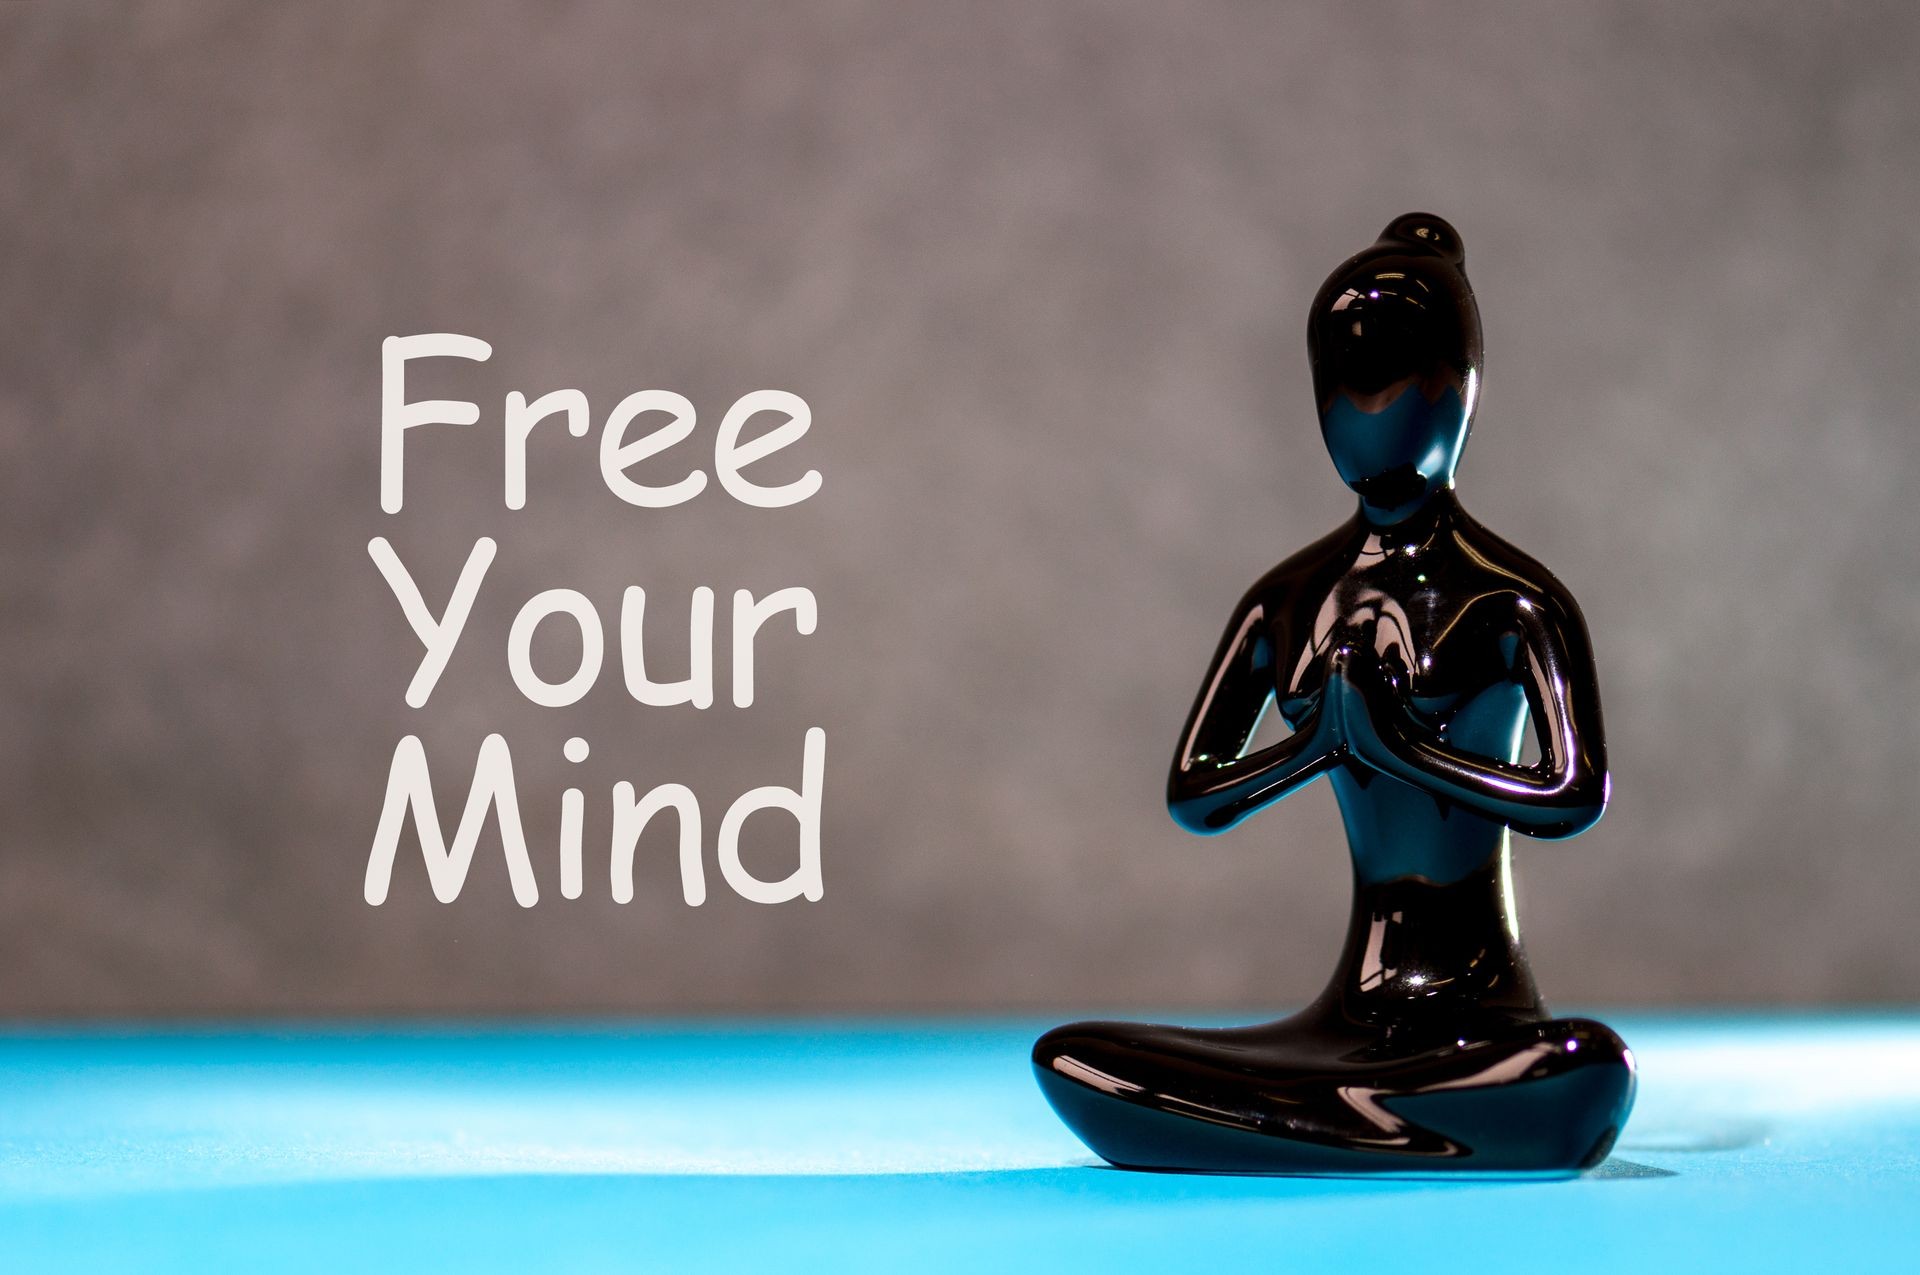 Free your mind - motivating text with white statuette of girl. Yoga and meditation concept